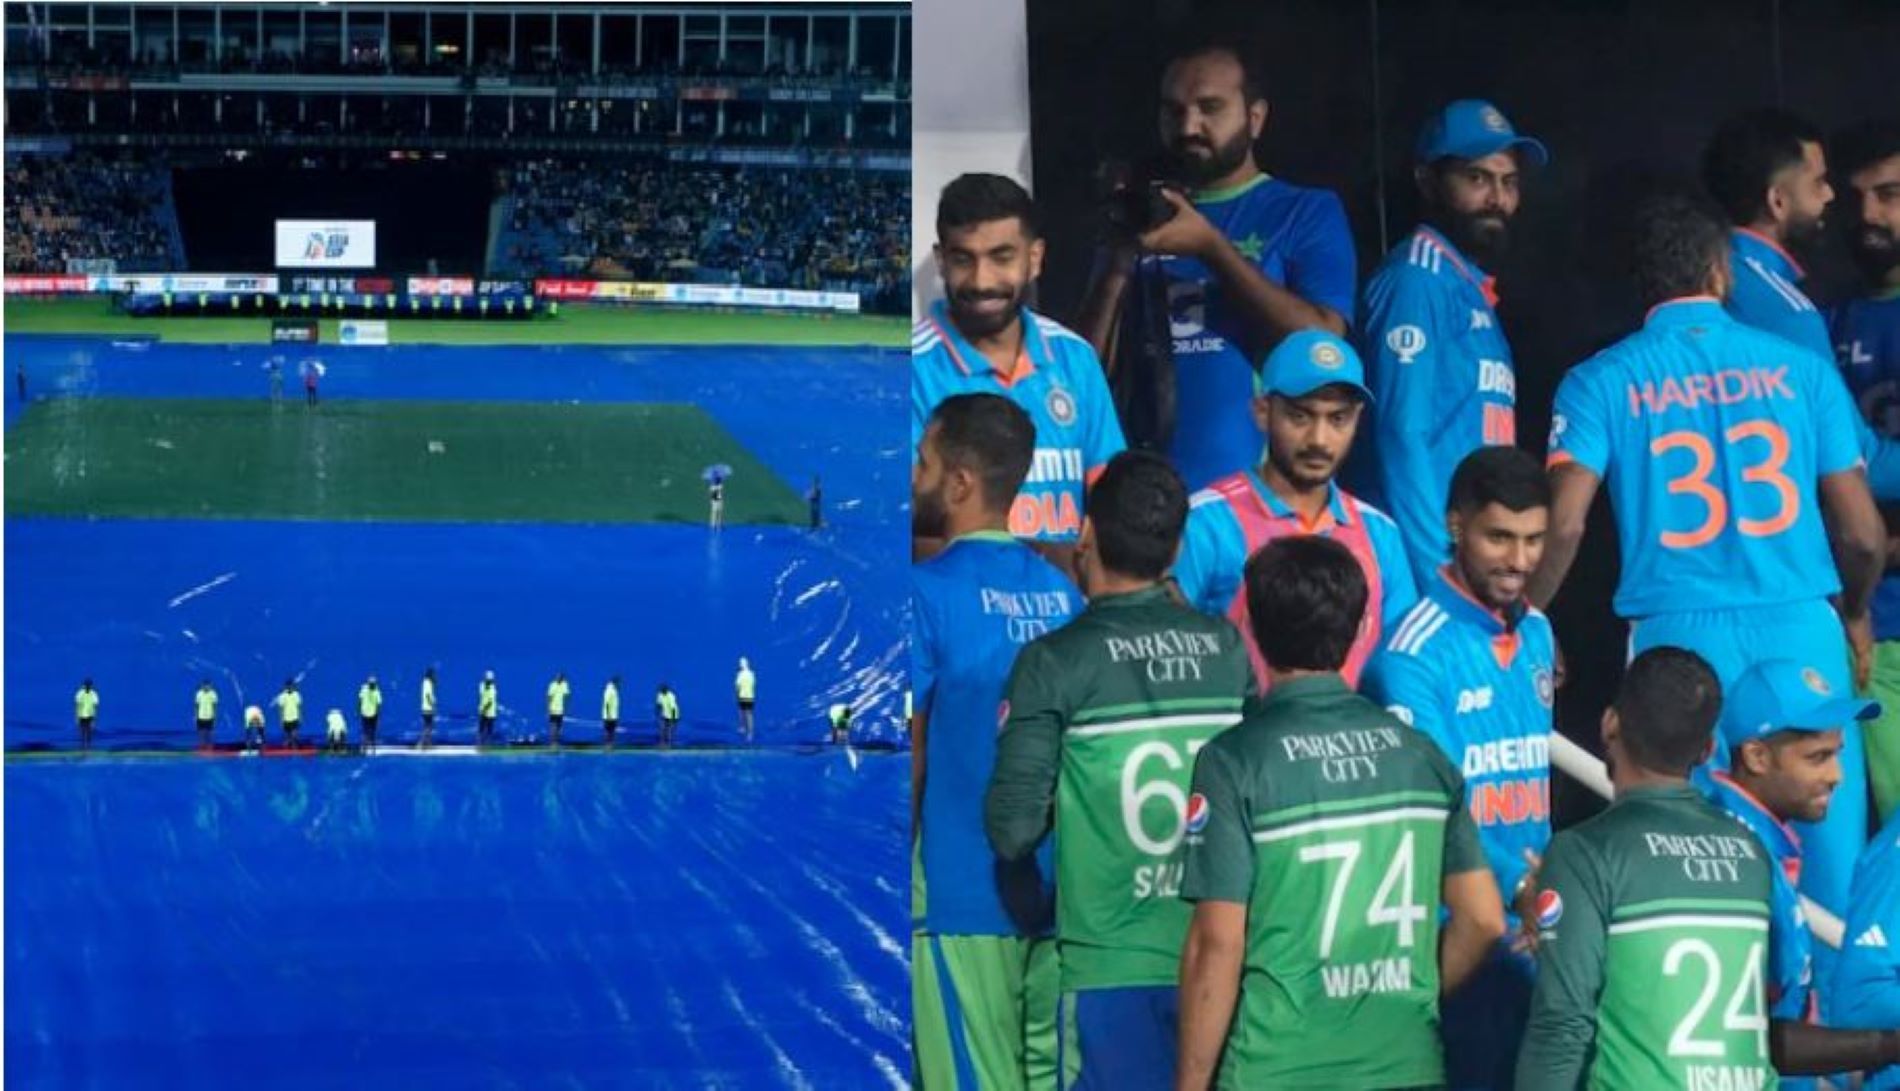 India and Pakistan shared a point each due to the washout